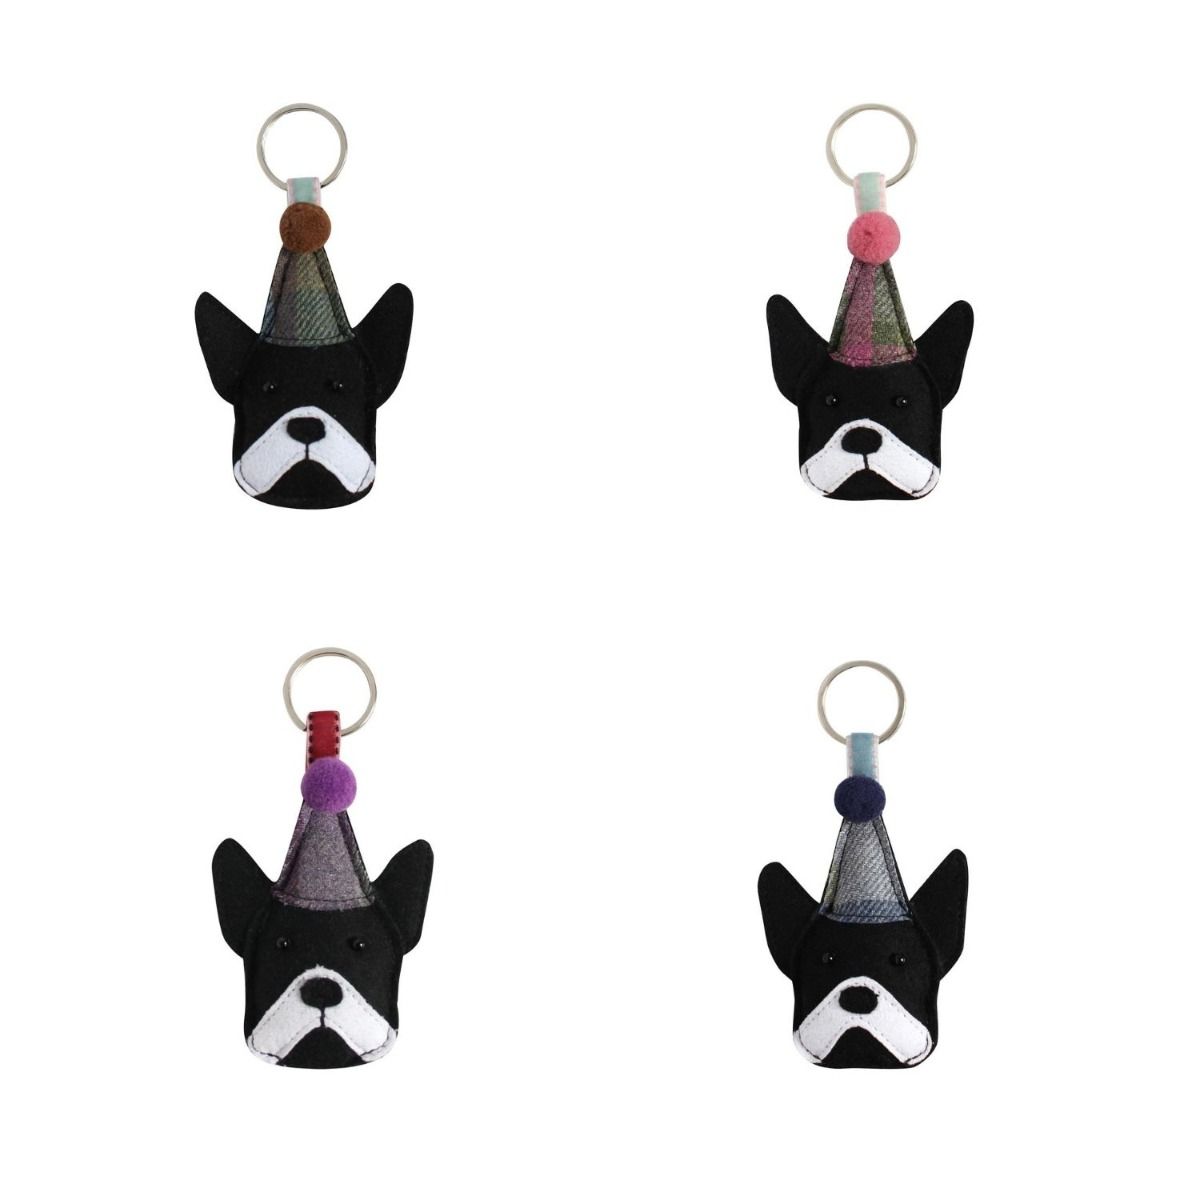 Dog Keyring By Earth Squared (Autumn)